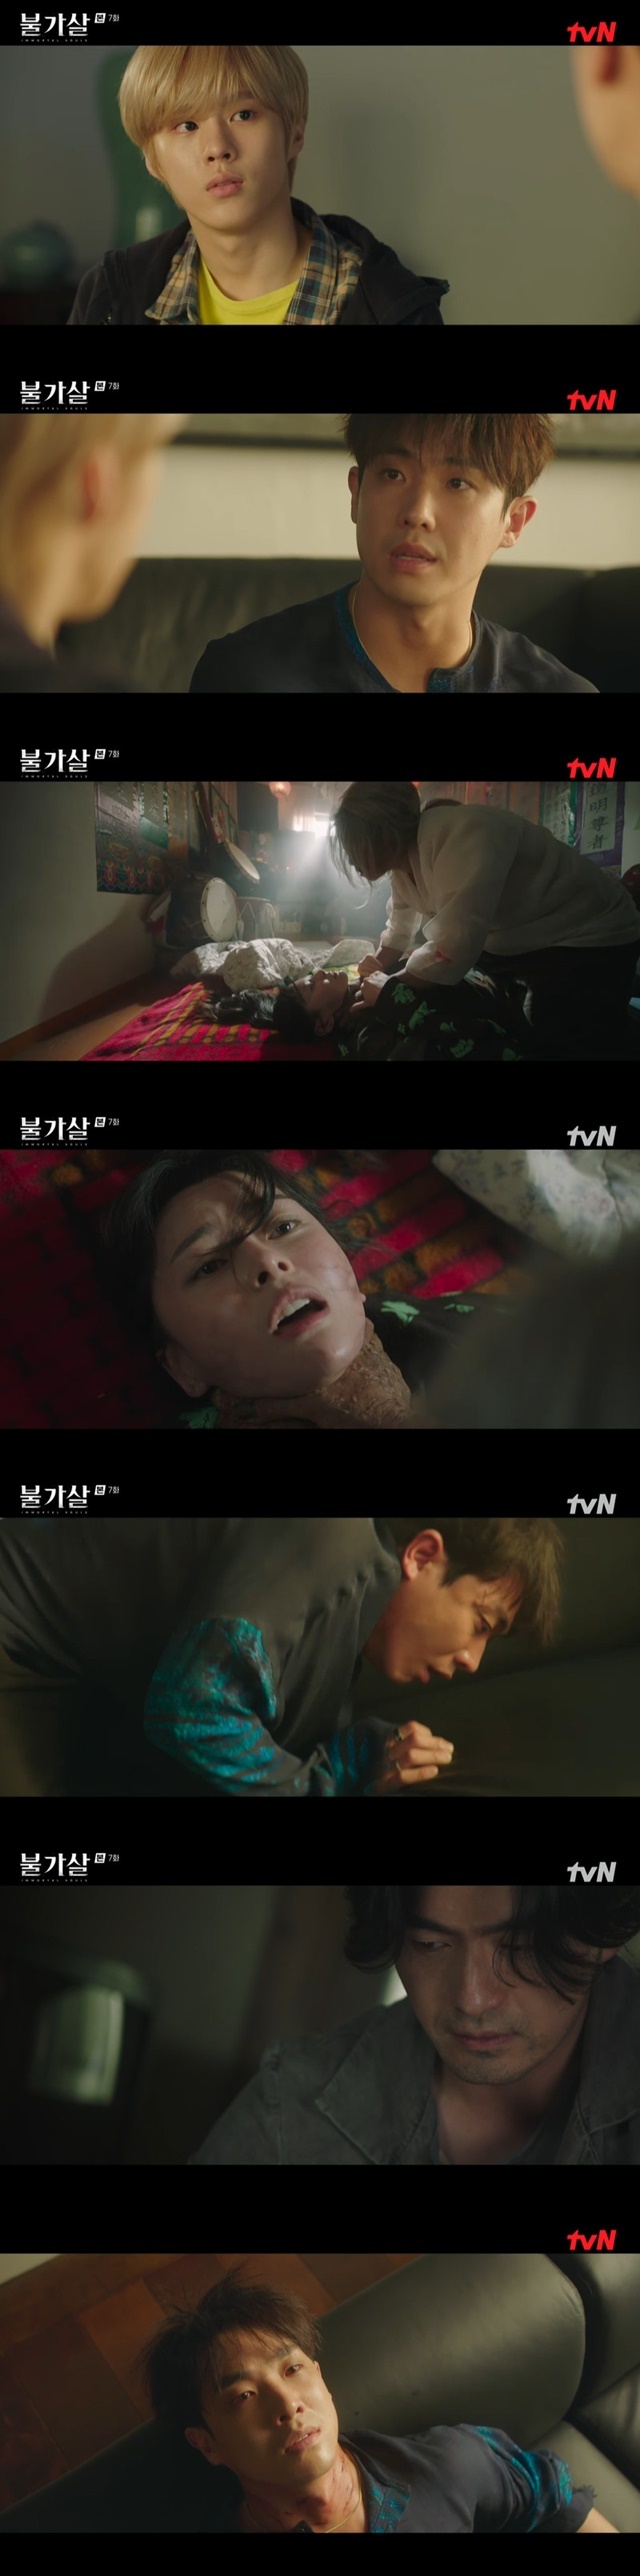 Irreplaceable Yousal Lee Joon reveals secret that he feels the same pain of Kwon NaraIn the 7th episode of TVNs Saturday drama Irreplaceable You Sal, which aired on January 8, Min Sang-woon (Kwon Nara) knew the secret of Lee Eul-tae.Kwon Detective (Jeong Jin-young) took Min Si-ho (Pyong Seung-yeon) to the hospital and found out that Min Si-ho was pregnant.How hard is a single mother, Kwon said, and Min Si-ho told her sister, Min Sang-woon, the name of Irreplaceable Yousal Ok Eul-tae (Lee Joon).Kwon began to investigate Ok Eul-tae and found out that the prosecutor who was in charge of the case of Min Sang-woons twin sister 15 years ago became the mayor.Dan-hwal (Lee Jin-wook) took Min Sang-woon (Kwon Nara) to where he lived in his past life 50 years ago.Min Sang-woon lived under the name Kim Hwa-yeon 50 years ago and fled the house by avoiding Irreplaceable You Sal Ok Eul-tae (Lee Joon).The fire killed Kims parents and neighbors.Min Sang-woon said that he had killed others to live 50 years ago, but he said, It is not a demon. He said, Peoples lives were nothing to you.Min Si-ho (played by Gong Seung-yeon) held hands to confirm the fact when the reincarnation of a maid (played by Park Myung-shin) said that she saved her life with the help of Dan-hwal in a fire accident 50 years ago and lived in an orphanage under the support of Dan-hwal.The maid has no memory of the previous one.Minshiho took her hand and knew that all the past history she had heard from Danhwal was true, and she was surprised when her soul told Minshiho, Take my souls memory, it is painful.Danhwal and Min Sang-woon wondered about Kim Hwa-yeon, and after 50 years of fire at Kim Hwa-yeons house, they knew that a large and small fire continued.Dan-hwal found a witness who said that Kim Hwa-yeon had set fire 50 years ago, knowing that the ghost of the ghost was reincarnated and committed arson.The witness was the son of a gangster, and he was overturning the arson committed by the gangster to Kim.The gangster had ordered the last arson when he heard that there was a person looking for Kim Hwa-yeon from his son, and Min Sang-woon was worried that others would be hurt because of him.Dan-hwal warned Min Sang-woon, Do not go into the room with the gangsan monster, and went to stop the son of the gangsan monster.In the meantime, however, Min Sang-woon went into the room when he said that he had seen the secret of the black hole, and he was strangled by the gangsan.At the same time, Nam Do-yoon (Kim Woo-seok) visited Ok Eul-tae and revealed that Ok Eul-tae was a spy planted by Dan-hwal.Nam Do-yoon said that Dan-hwal and Min Sang-woon visited the place where they lived in their past 50 years ago, and Ok-tae was suffering as Min Sang-woon was strangled by Gapsan.When he stabbed you in the stomach, you also got blood on his stomach, the Gabsan monster told Min Sang-woon. Why is he in pain when youre stabbed?Dan-hwal returned and saved Min Sang-woon, and he escaped from the pain of the jade, saying to himself, You have to kill it, and you have to get rid of it as soon as possible.Dan-hwal showed Min Sang-woon the remains of Kim Hwa-yeon and wanted to find the memory of his past life, but Min Sang-woon said, Why did this woman run alone without saving people?Is it because she was a devil in her past life? I dont feel sorry for this woman who would have died miserable on the mountain alone? she cried.